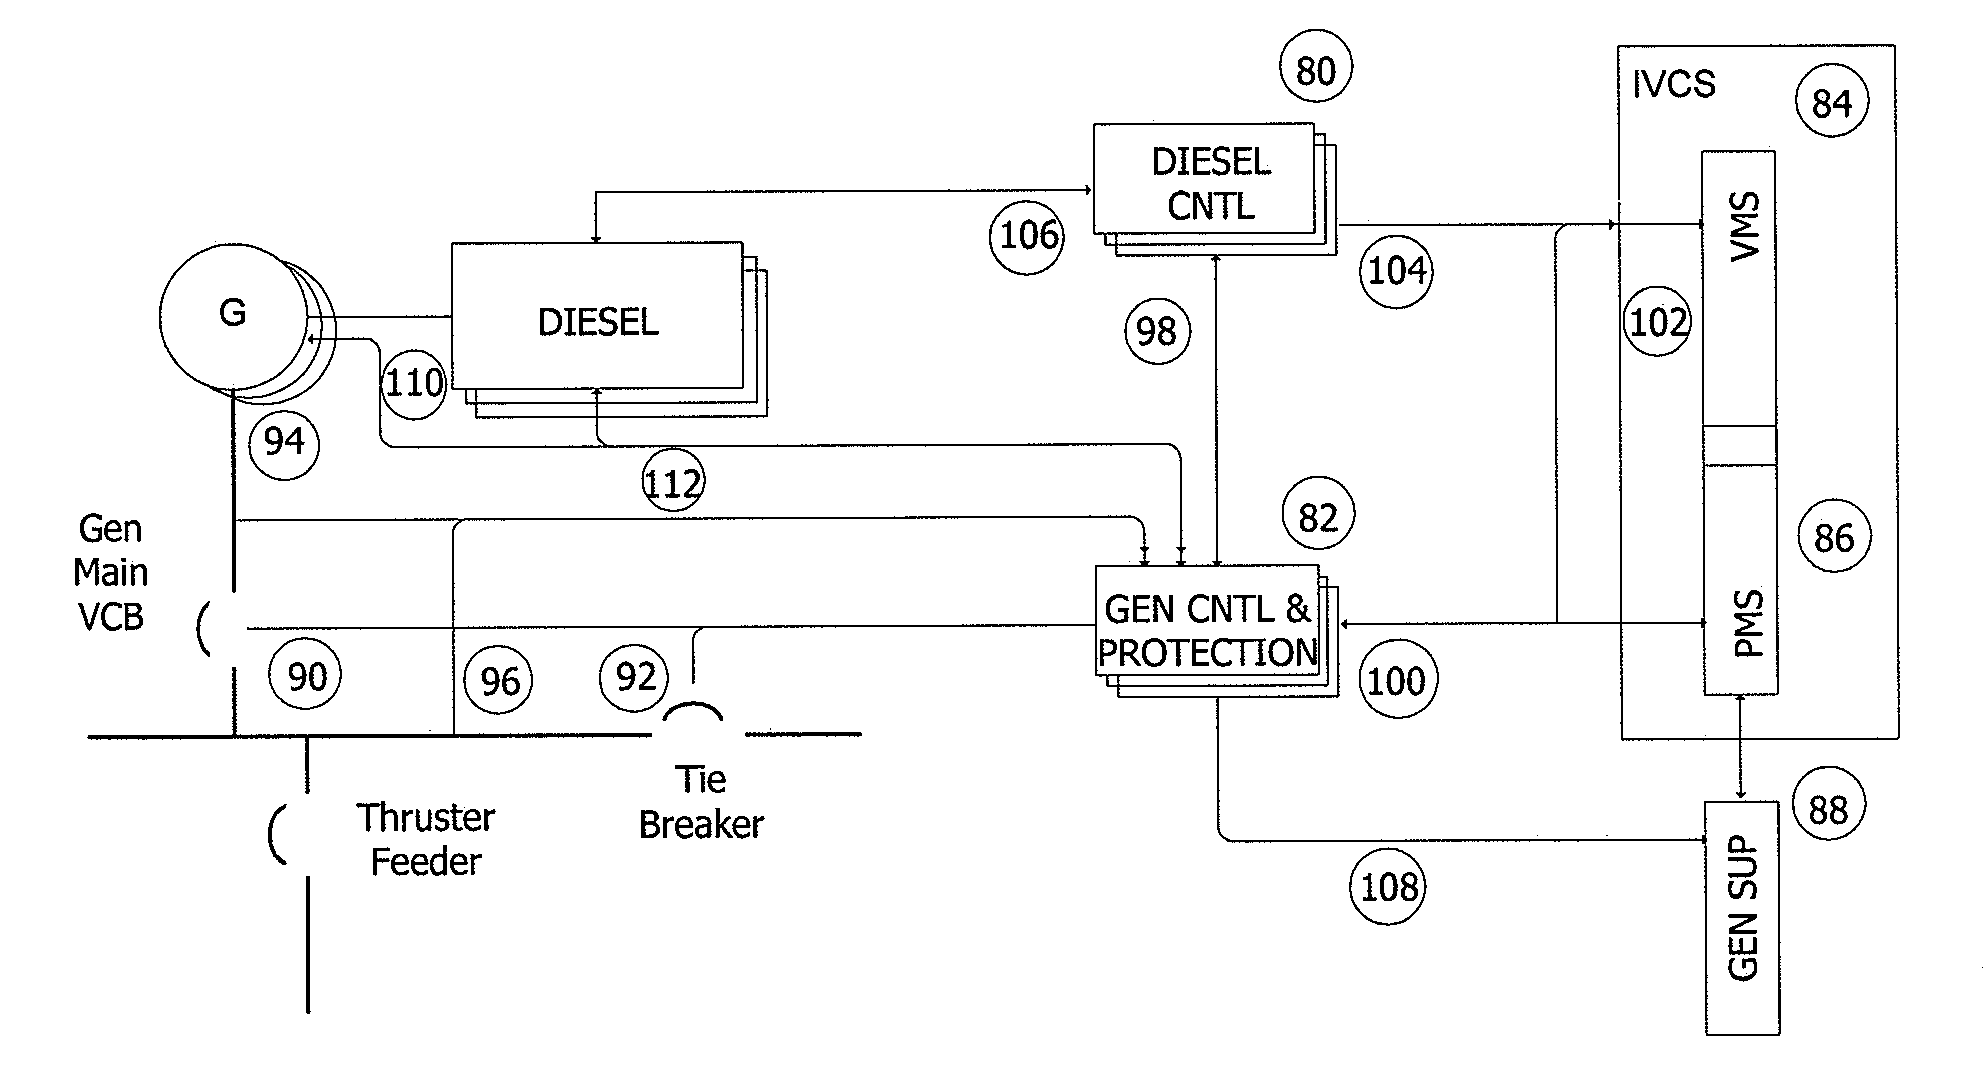 Generator power plant protection system and method